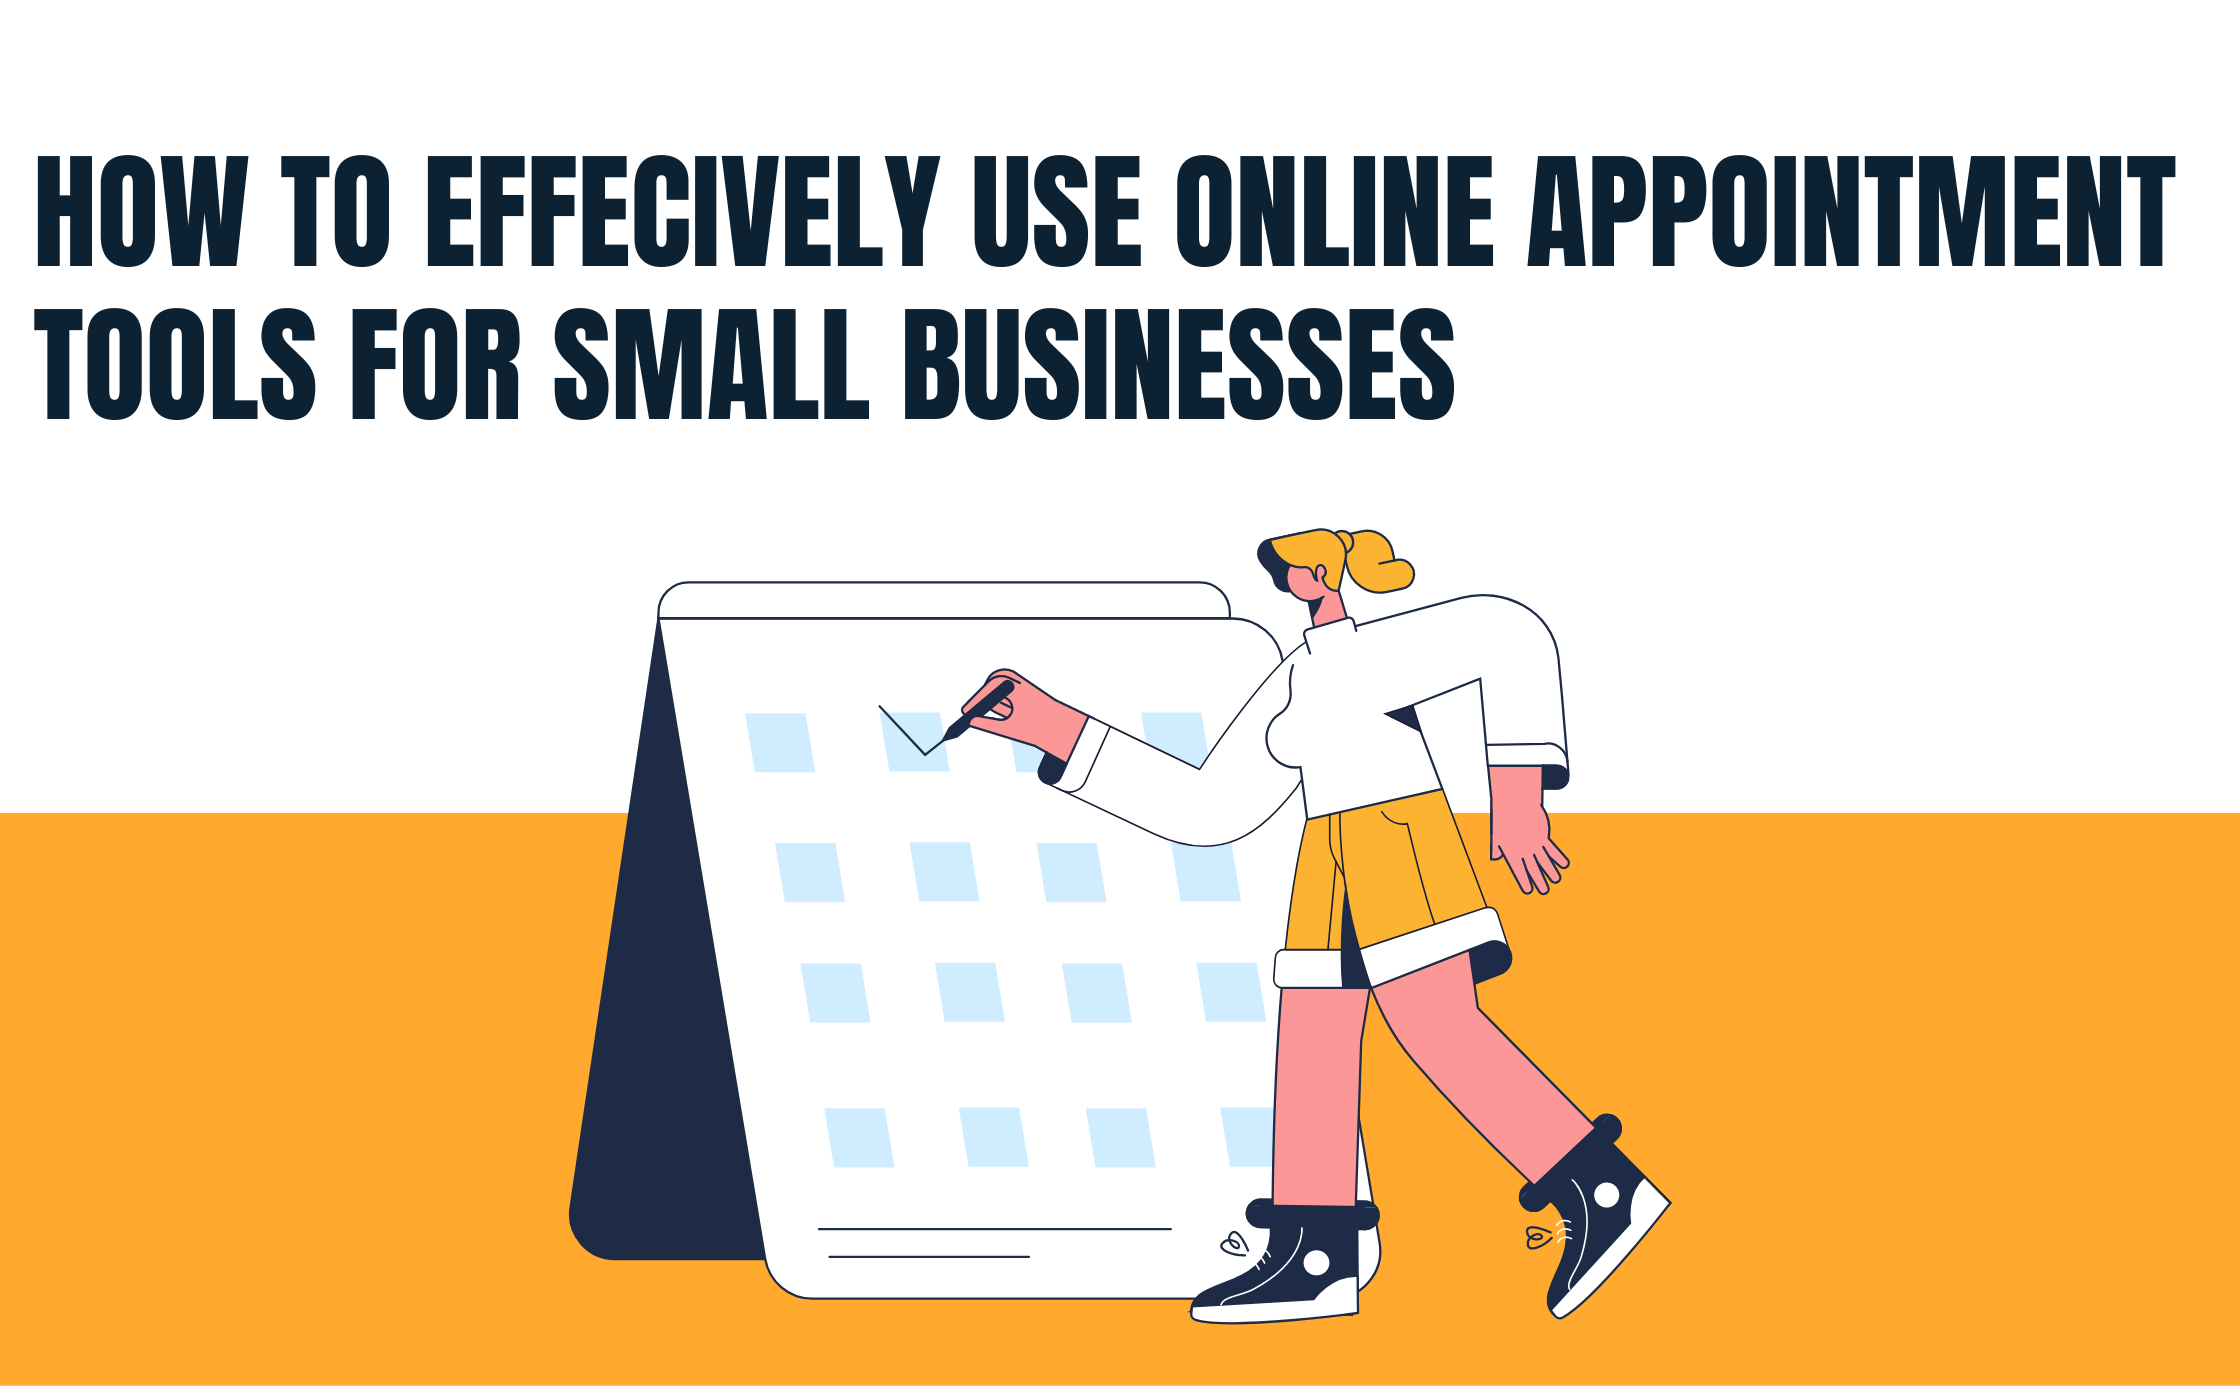 How to Effectively Use Online Appointment Tools for Small Businesses